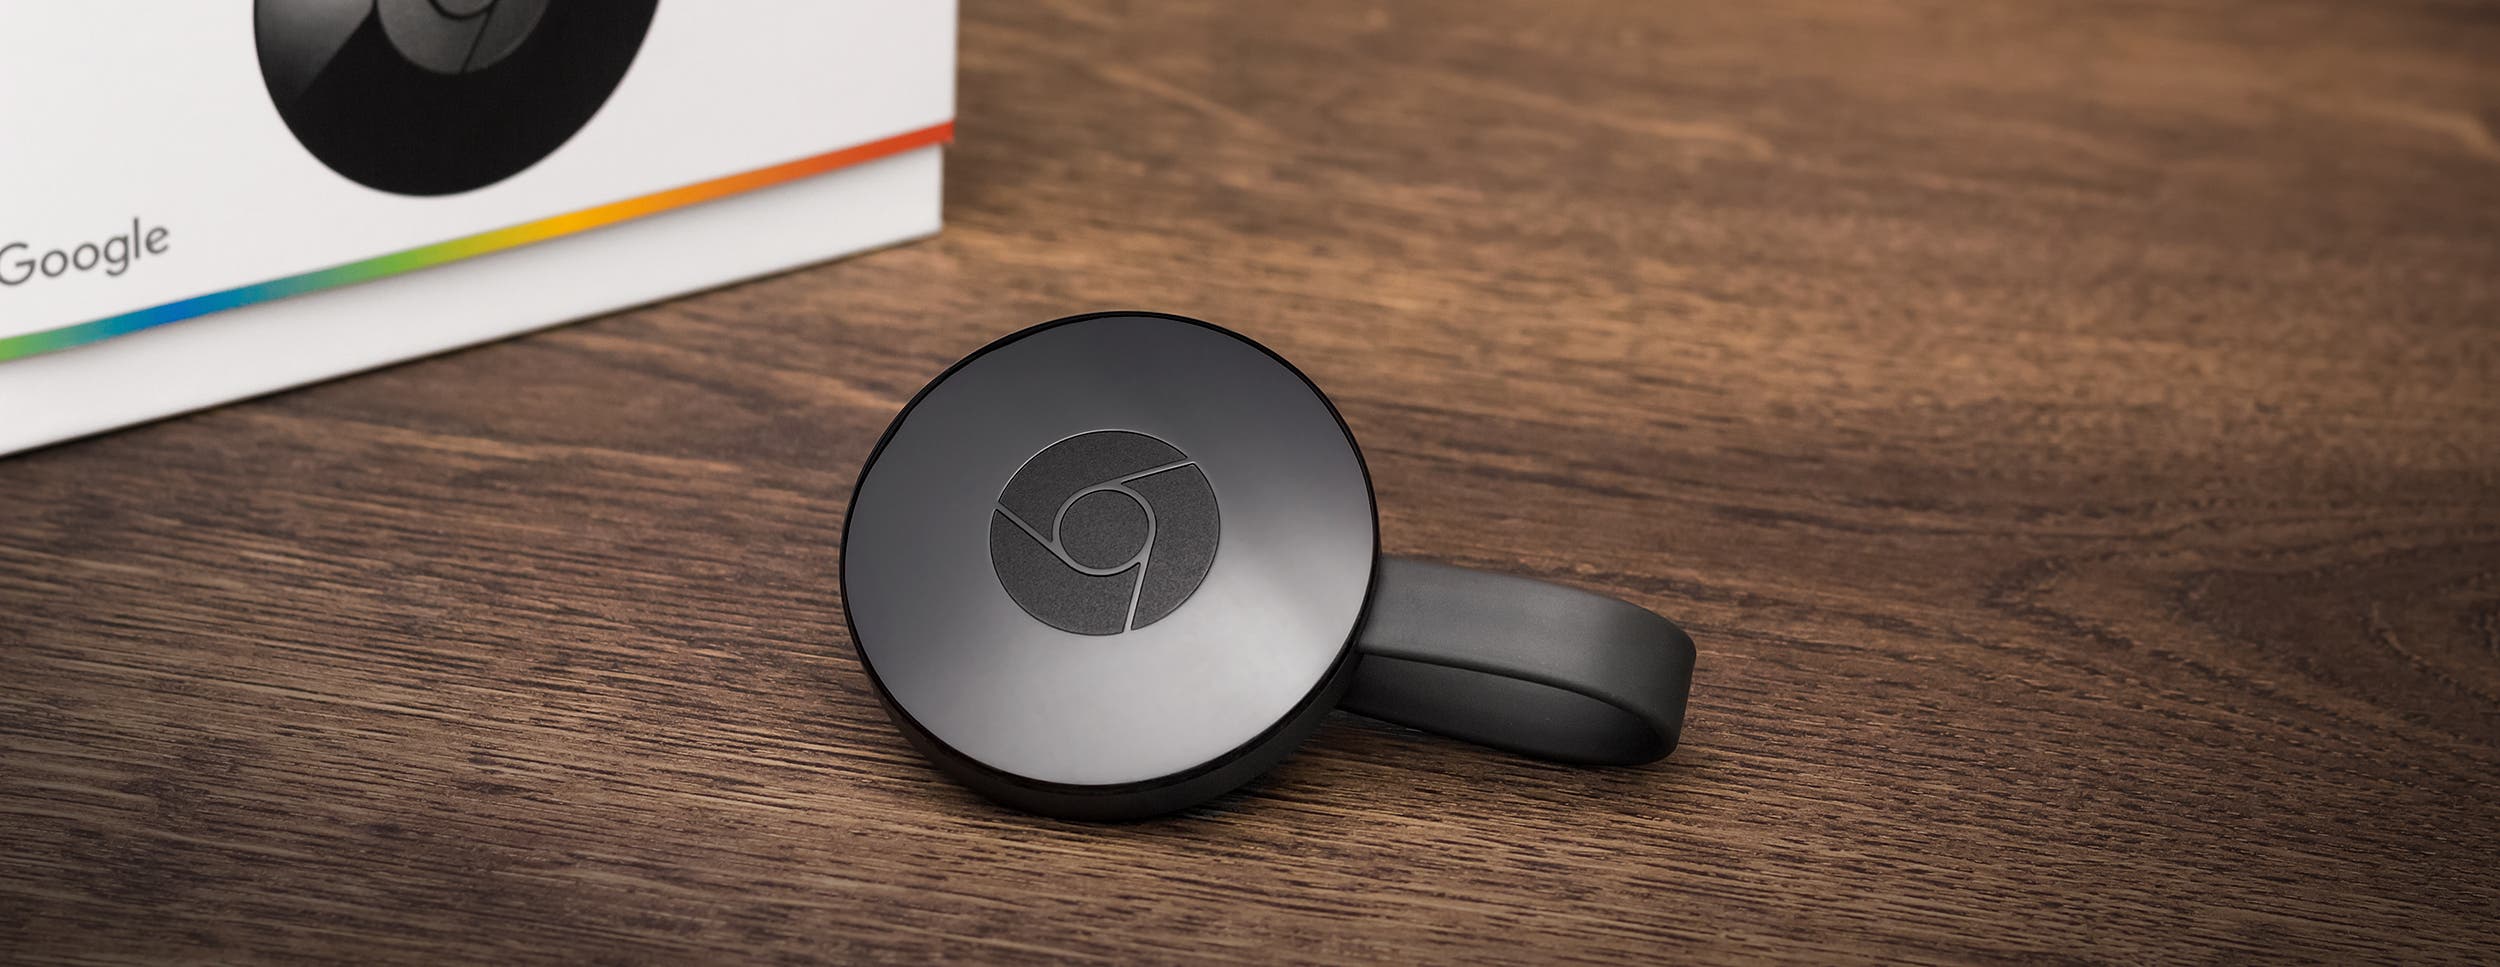 Michelangelo Bore Grøn baggrund How to Set Up Chromecast with Your TV: Our Quick & Easy Guide